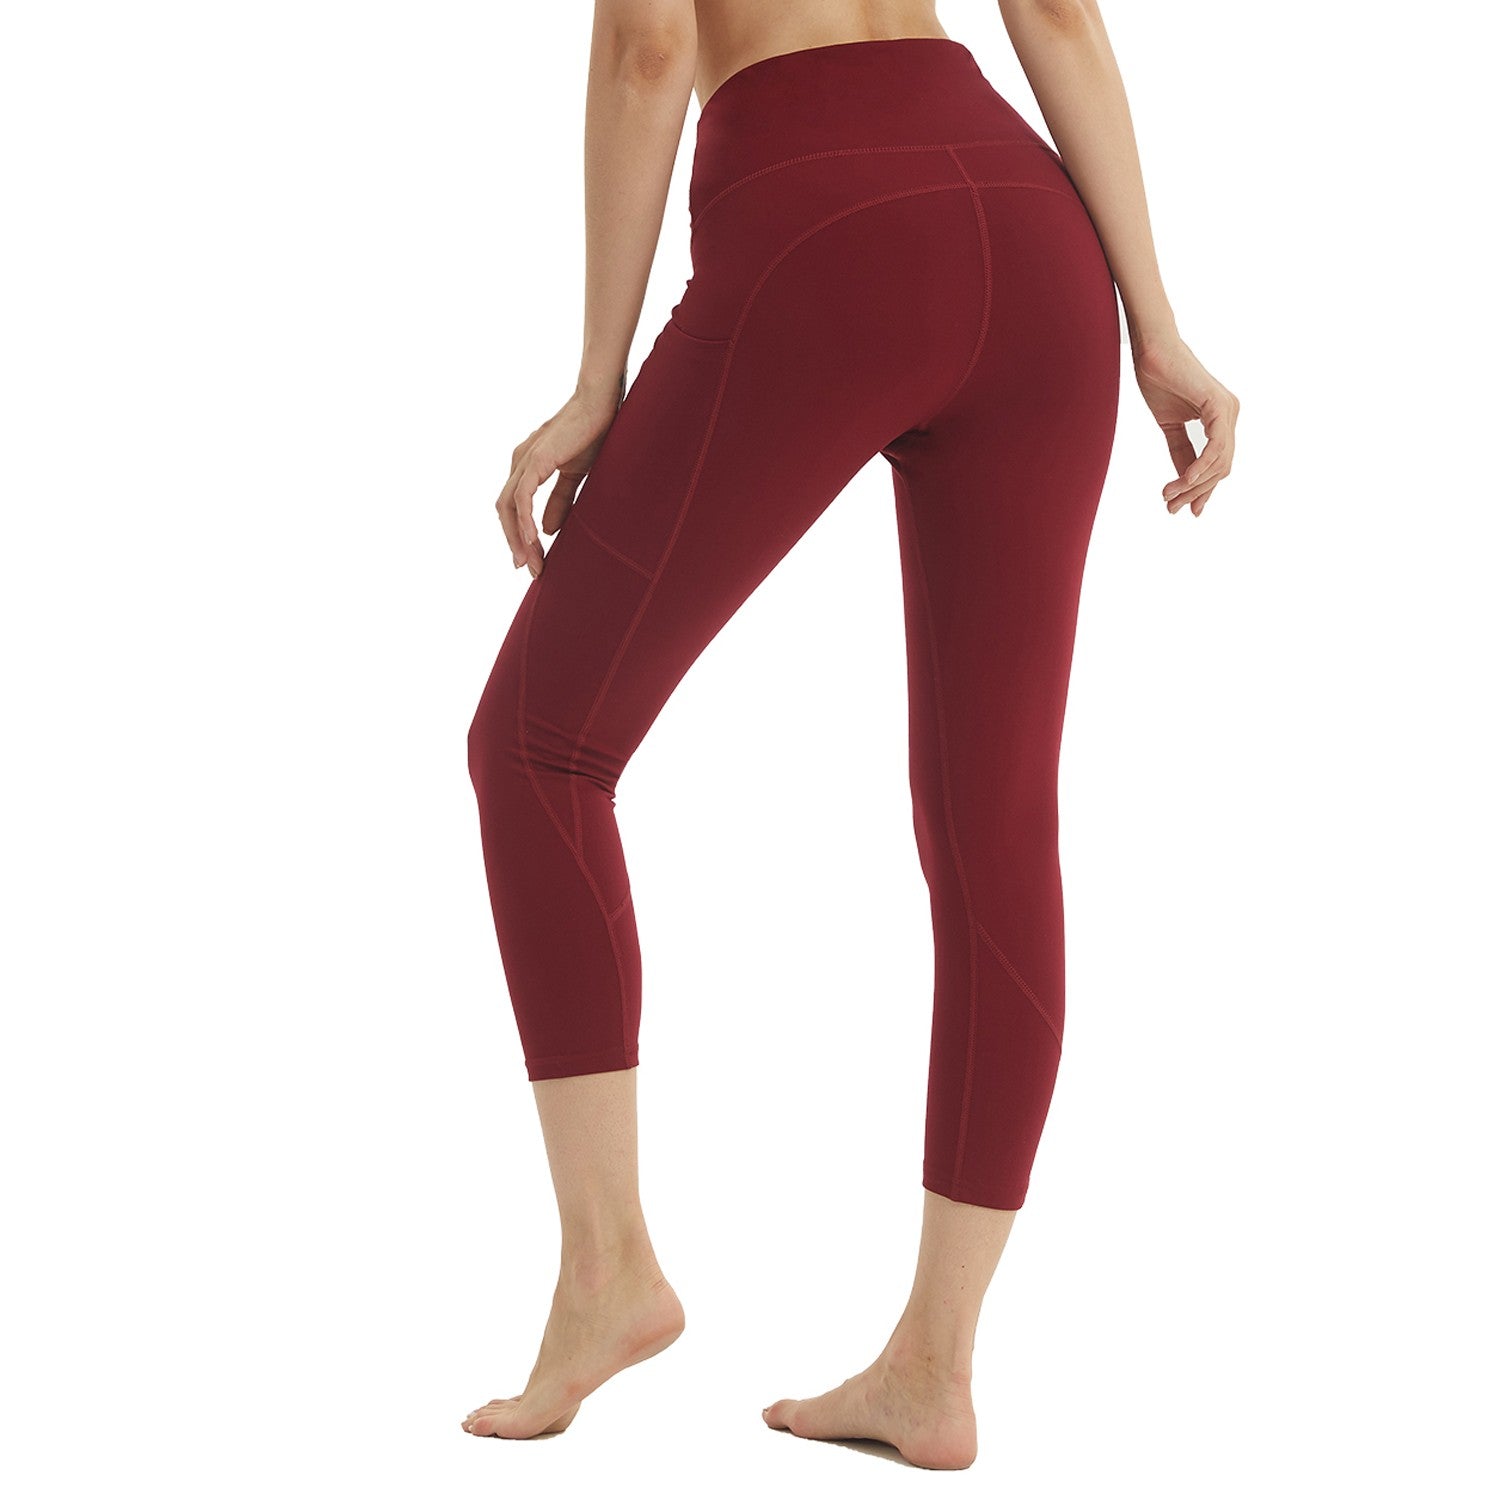  Gibobby Womens Yoga Pants Capri High Waisted Yoga Pants with  Pockets for Women 4-Way Stretch Soft Running Workout Leggings Athletic Yoga  Pants grigr7 Wine : ספורט ופעילות בחיק הטבע